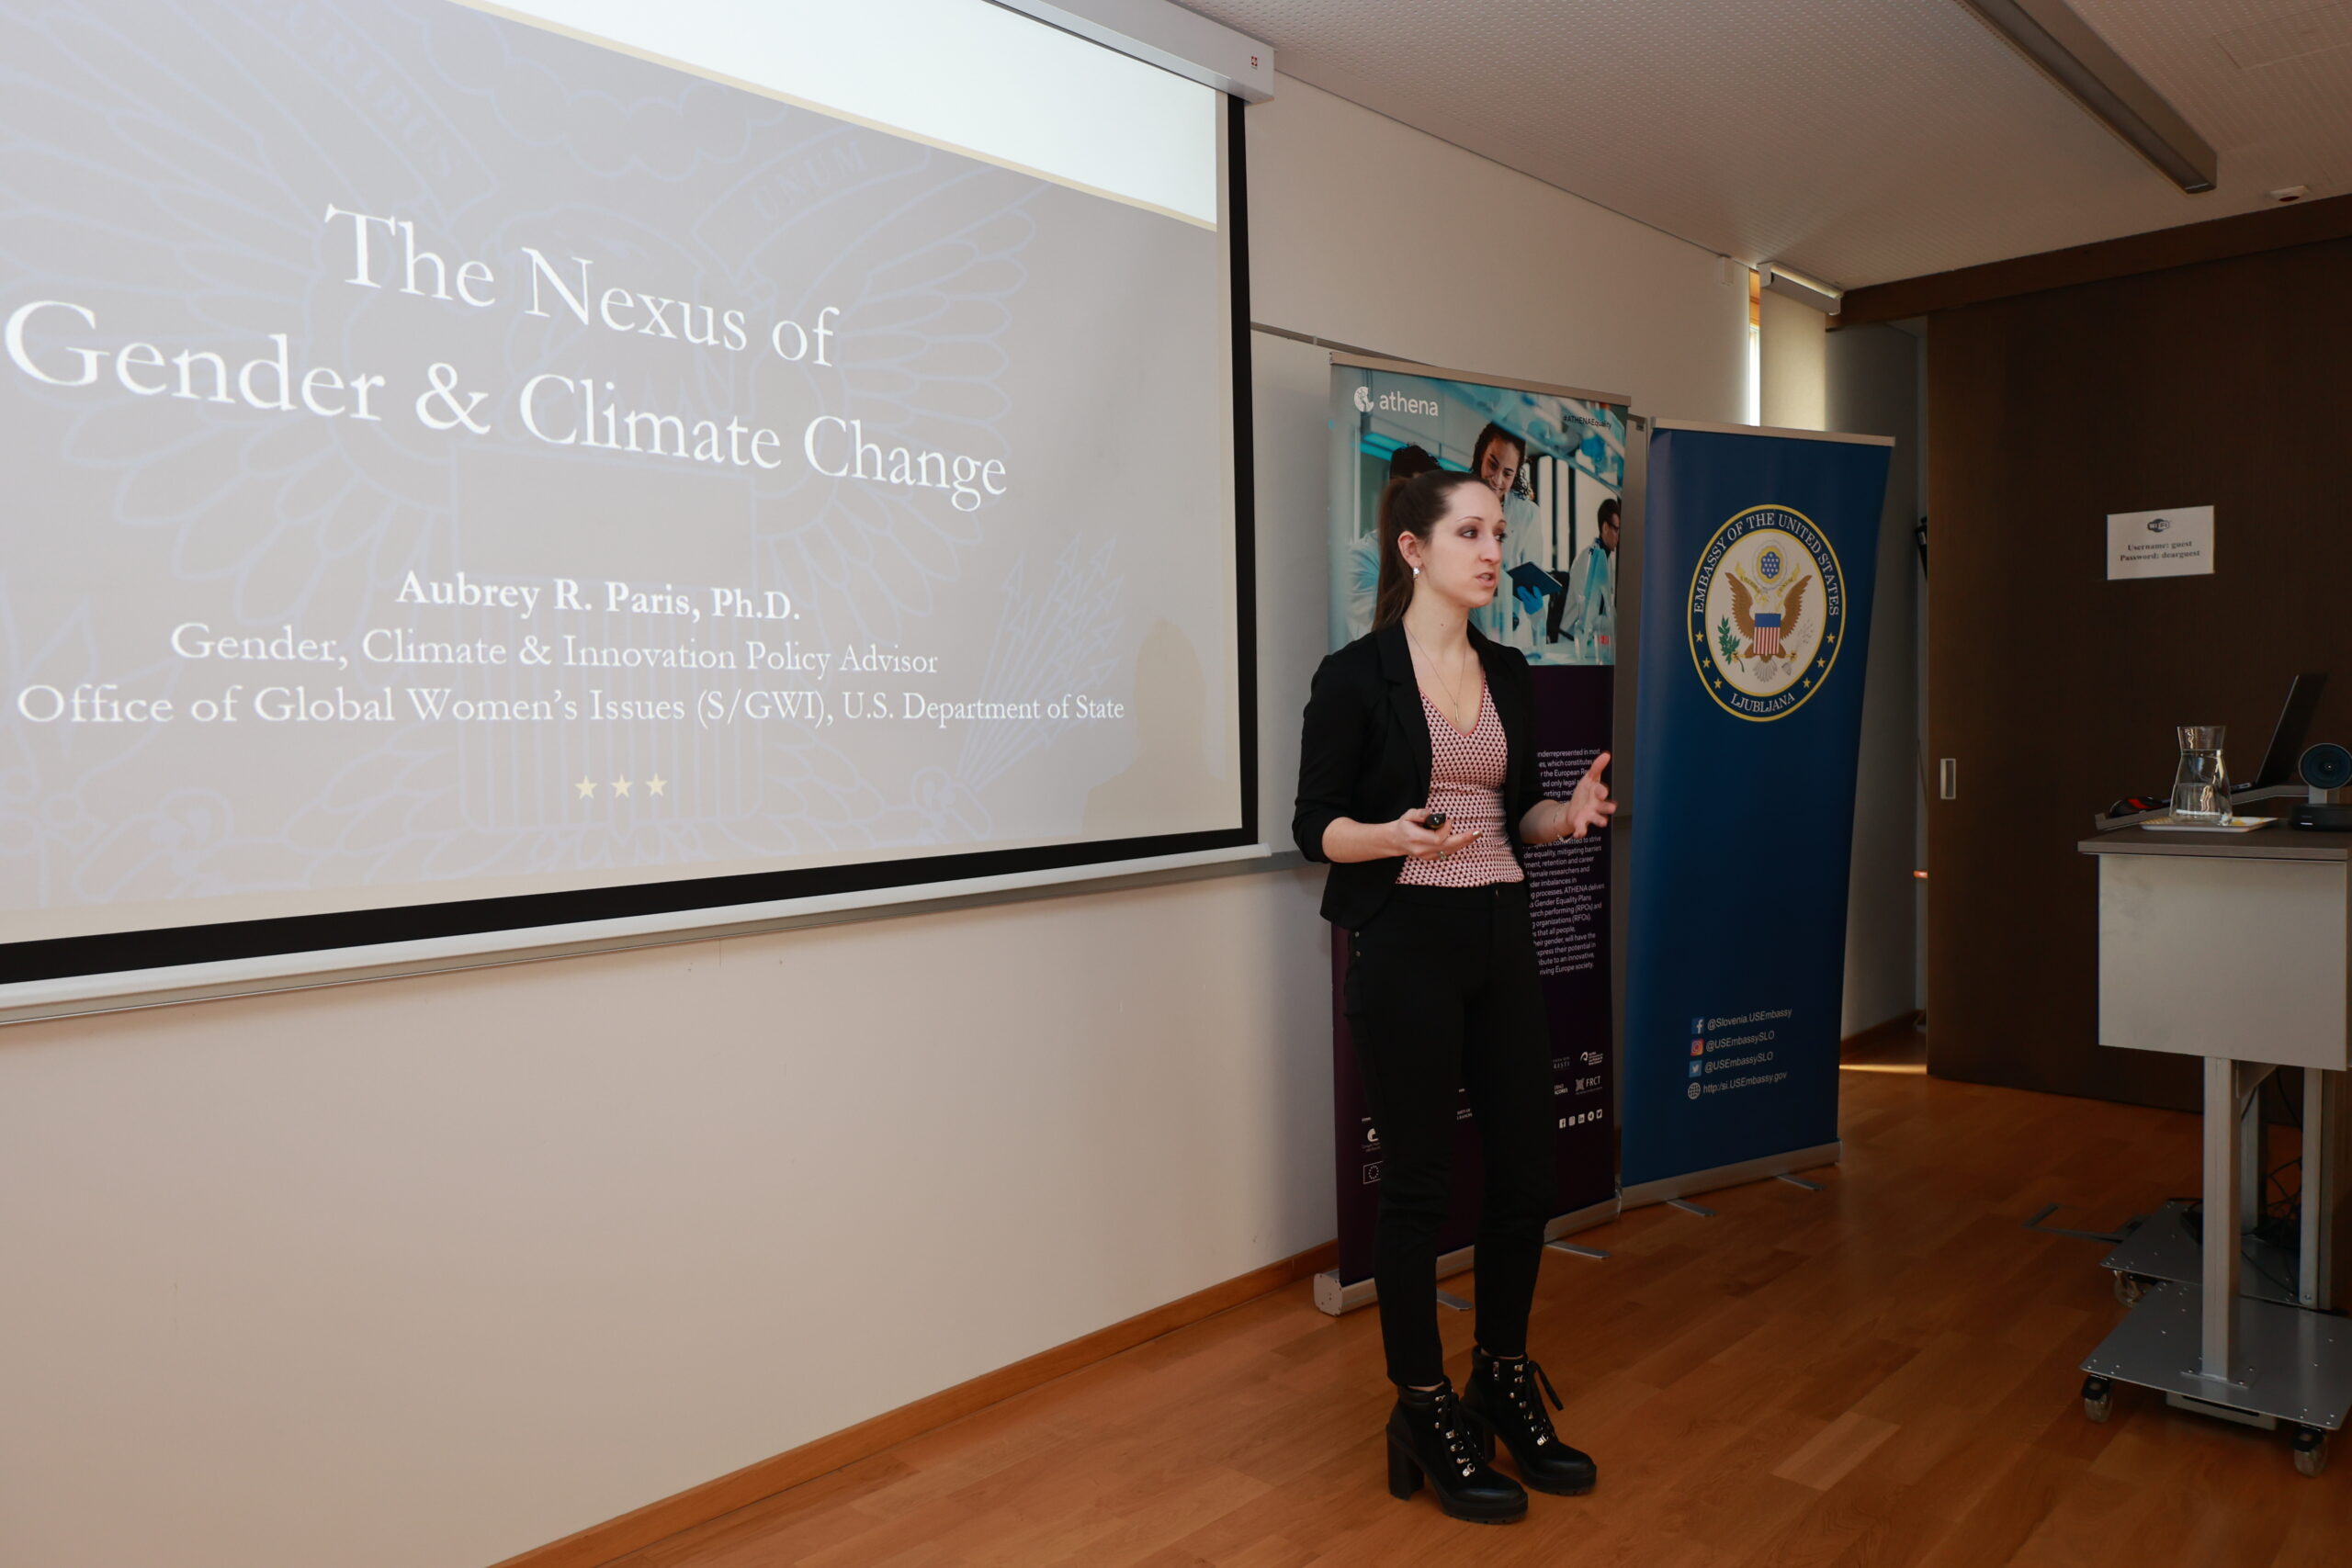 The Jožef Stefan Institute, in collaboration with the U.S. Embassy in Slovenia, hosted a lecture on the “Role of Women in Developing Solutions to Climate Change”